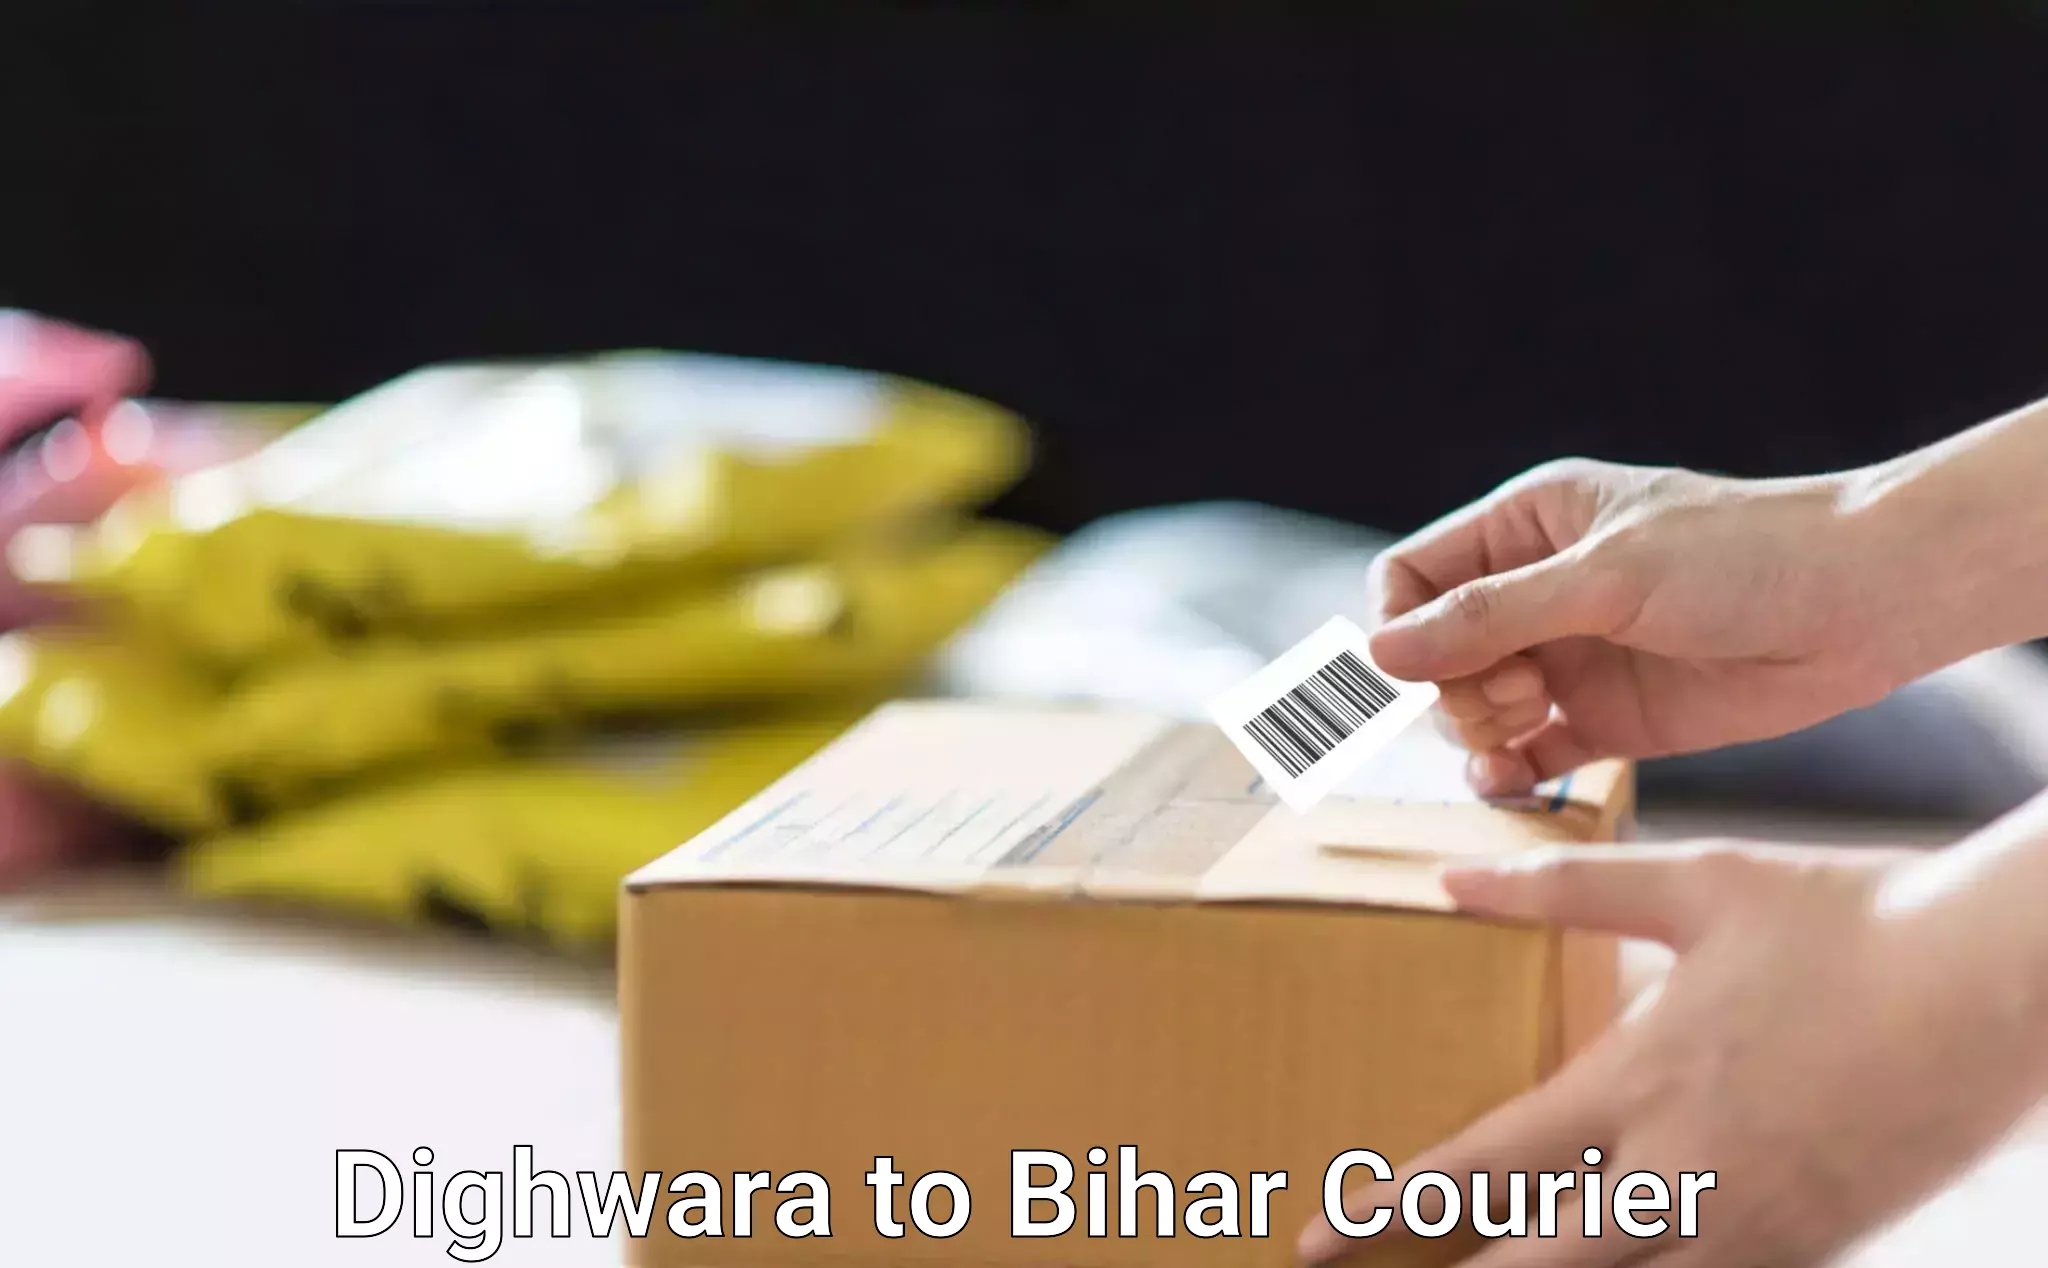 Quality moving company in Dighwara to Bihar